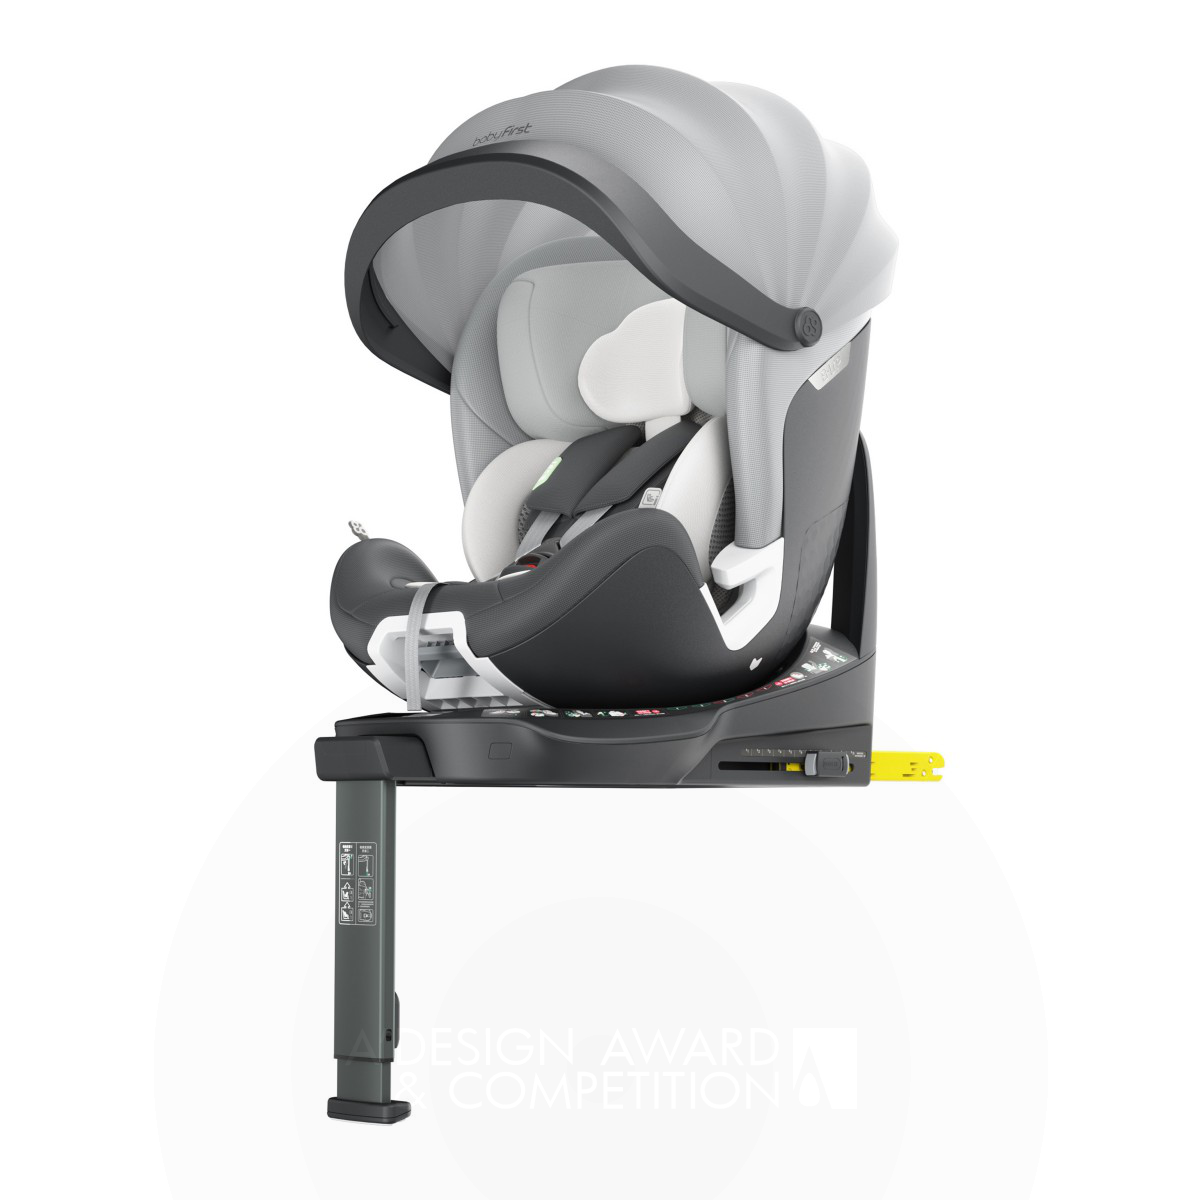 Ningbo Baby First Baby Products Co., Ltd Unveils the Joy Pro, a Revolutionary Child Car Seat